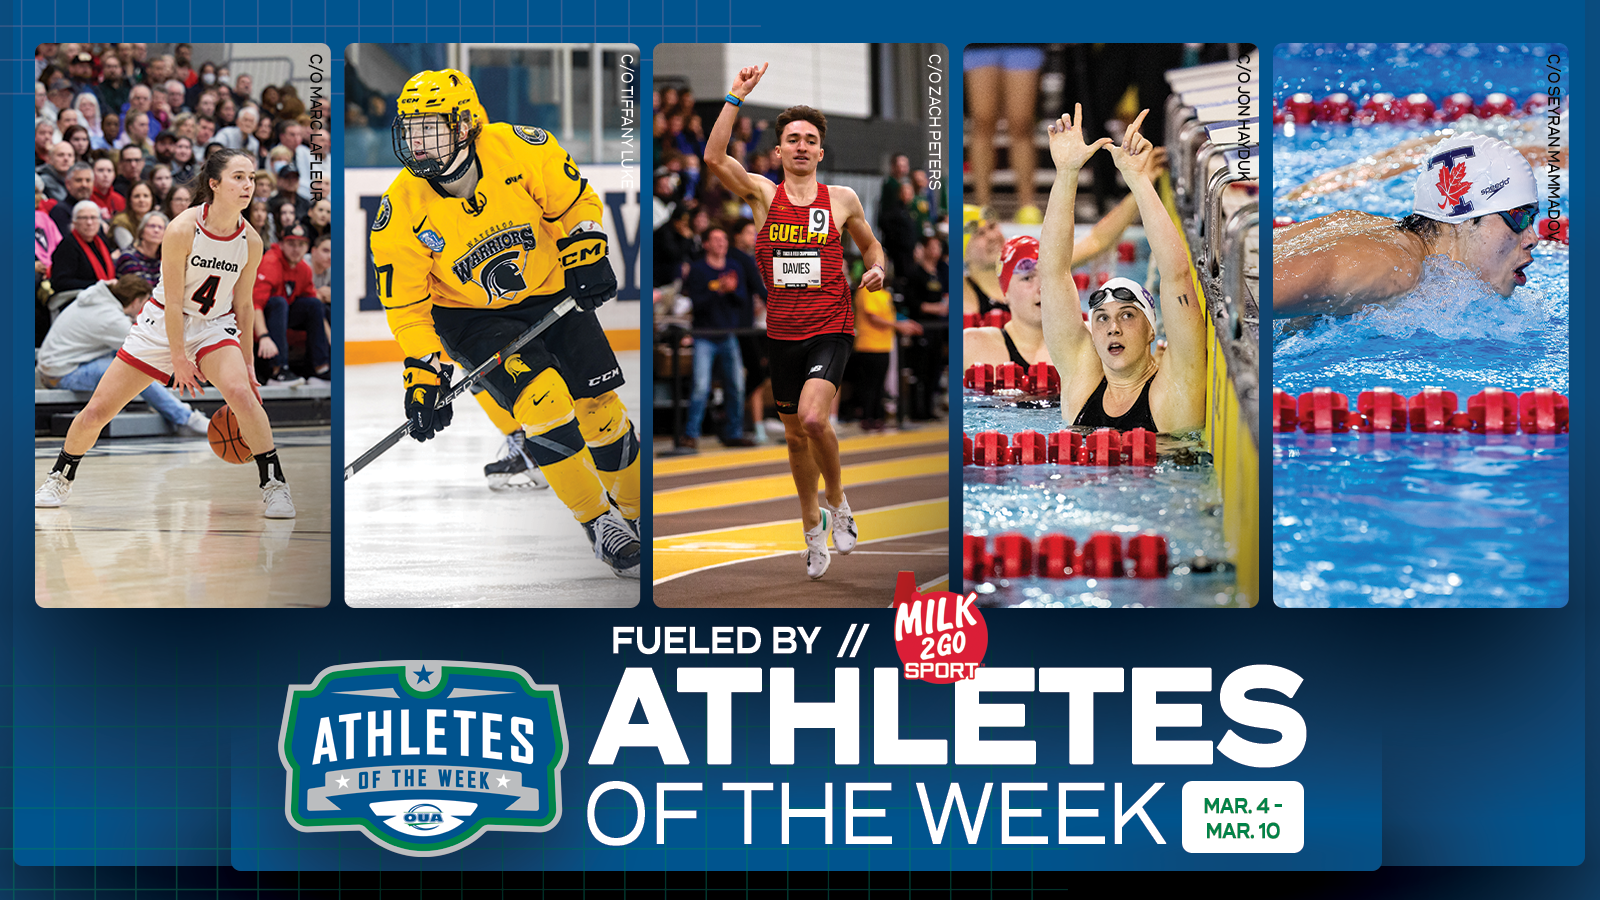 Graphic on a predominantly blue background with images and text. Three images are large and centered across the length of the graphic. The text logo at the bottom reads "Athletes of the Week" stating the time period of "March 4-  March 10" 2024. From left to right the images are: Carleton Ravens Women's Basketball athlete Kali Pocrnic, Waterloo Warriors Women's hockey athlete Paige Rynne, Guelph Gryphons Men's Track athlete Max Davies, Western Mustangs Women's swimmer Shona Branton, Toronto Varsity Bluesmen's swimmer Bill Dongfang